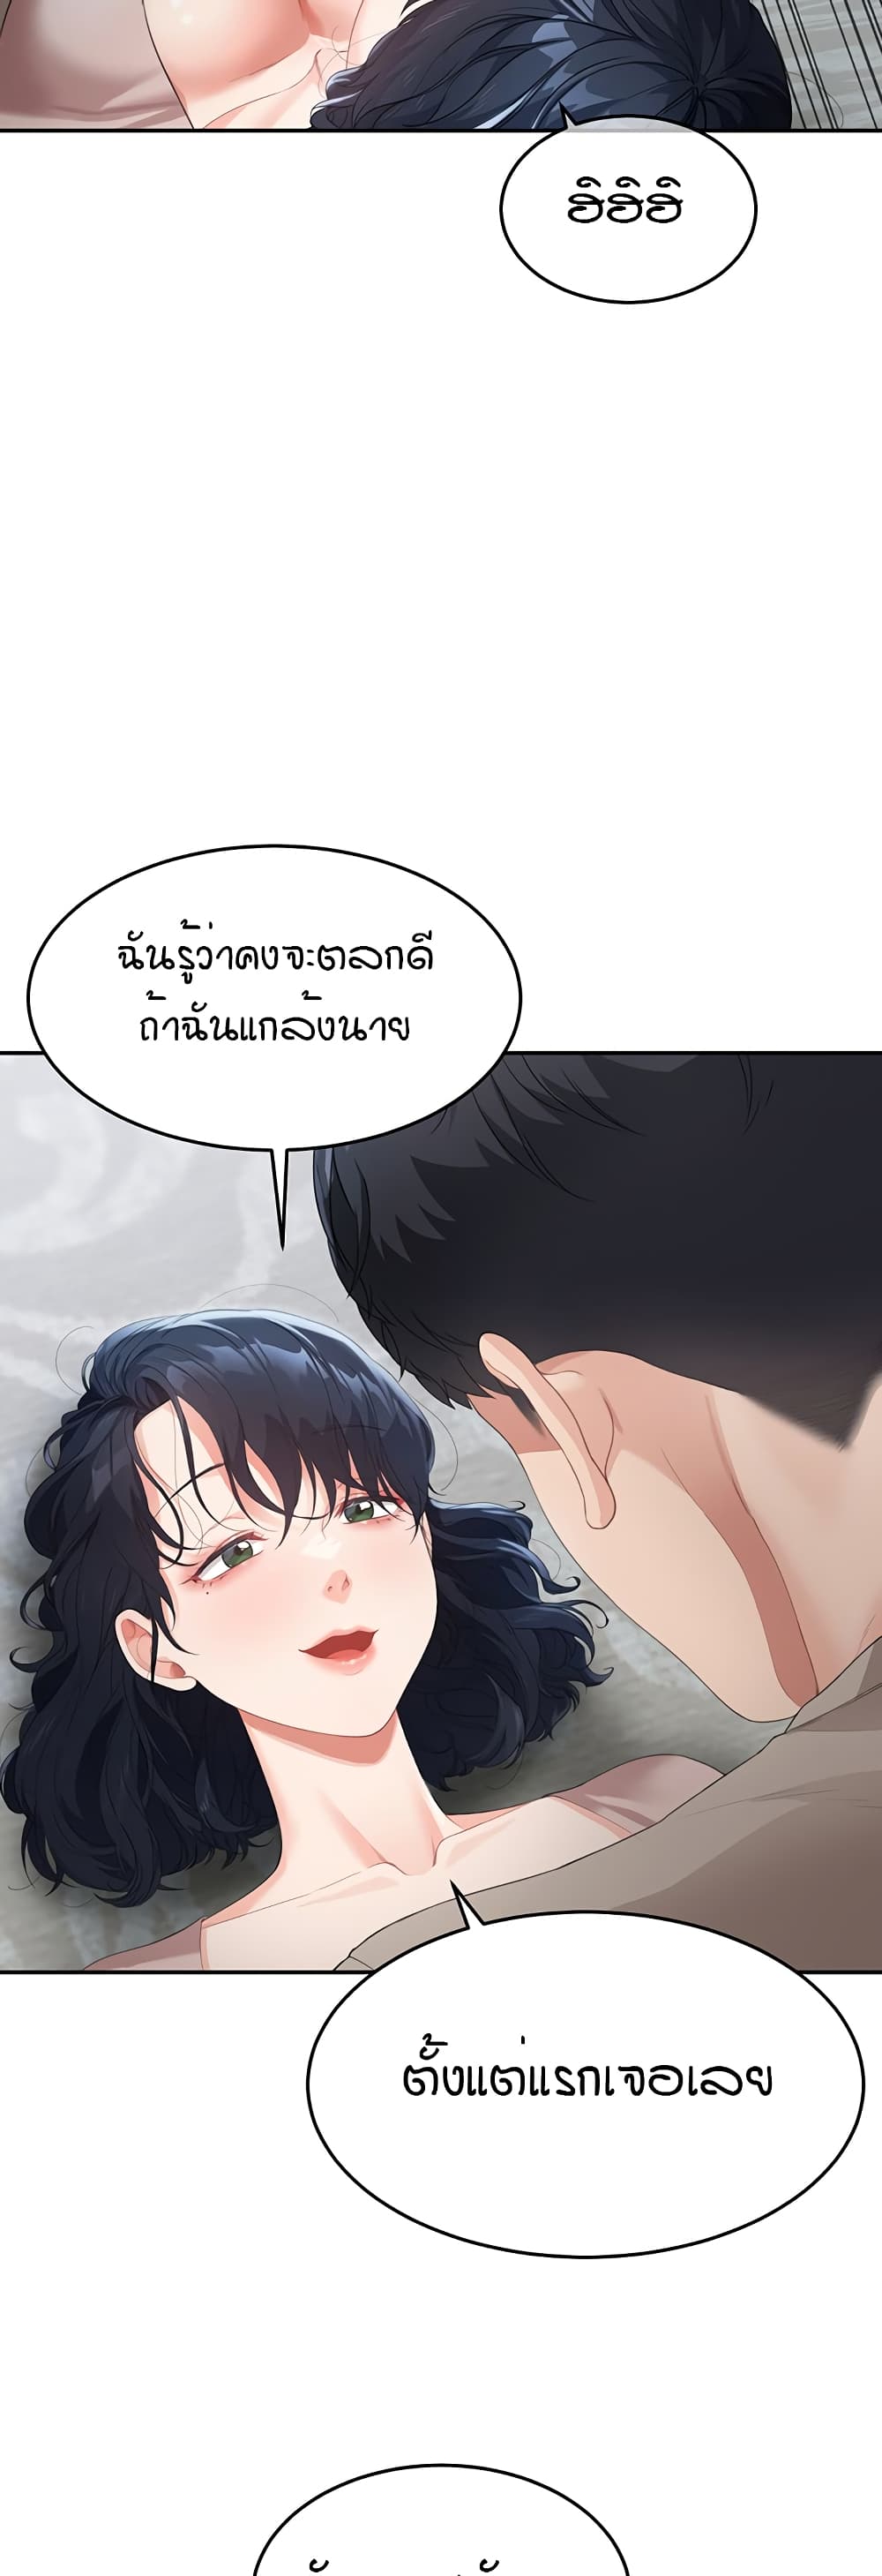 Is It Your Mother or Sister? ตอนที่ 5 ภาพ 25